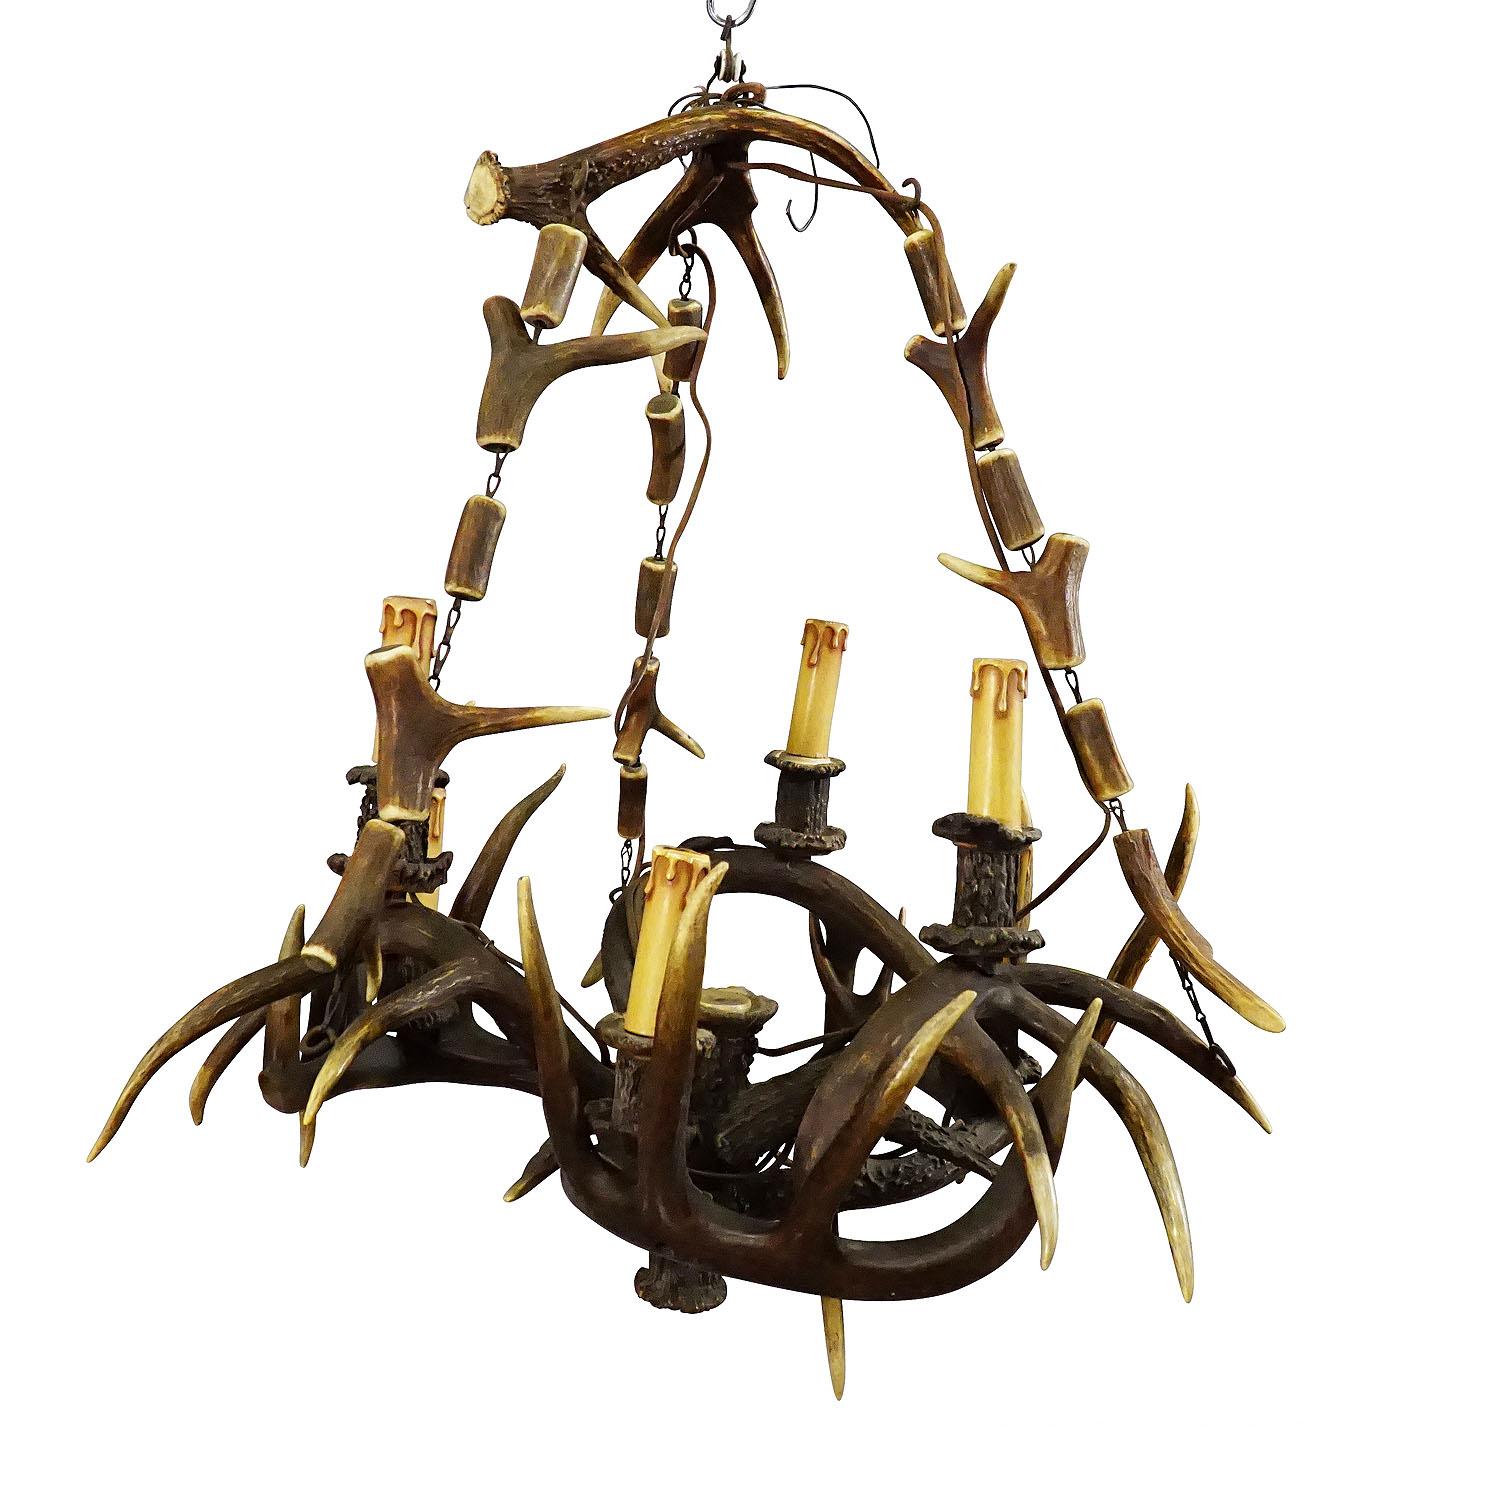 Rustic Black Forest Antler Chandelier ca. 1900

An antique rustic antler chandelier made of original deer and virginia deer antlers. Manufactured in Germany around 1900. The chandelier features 6 electrified spouts in candle design. The original